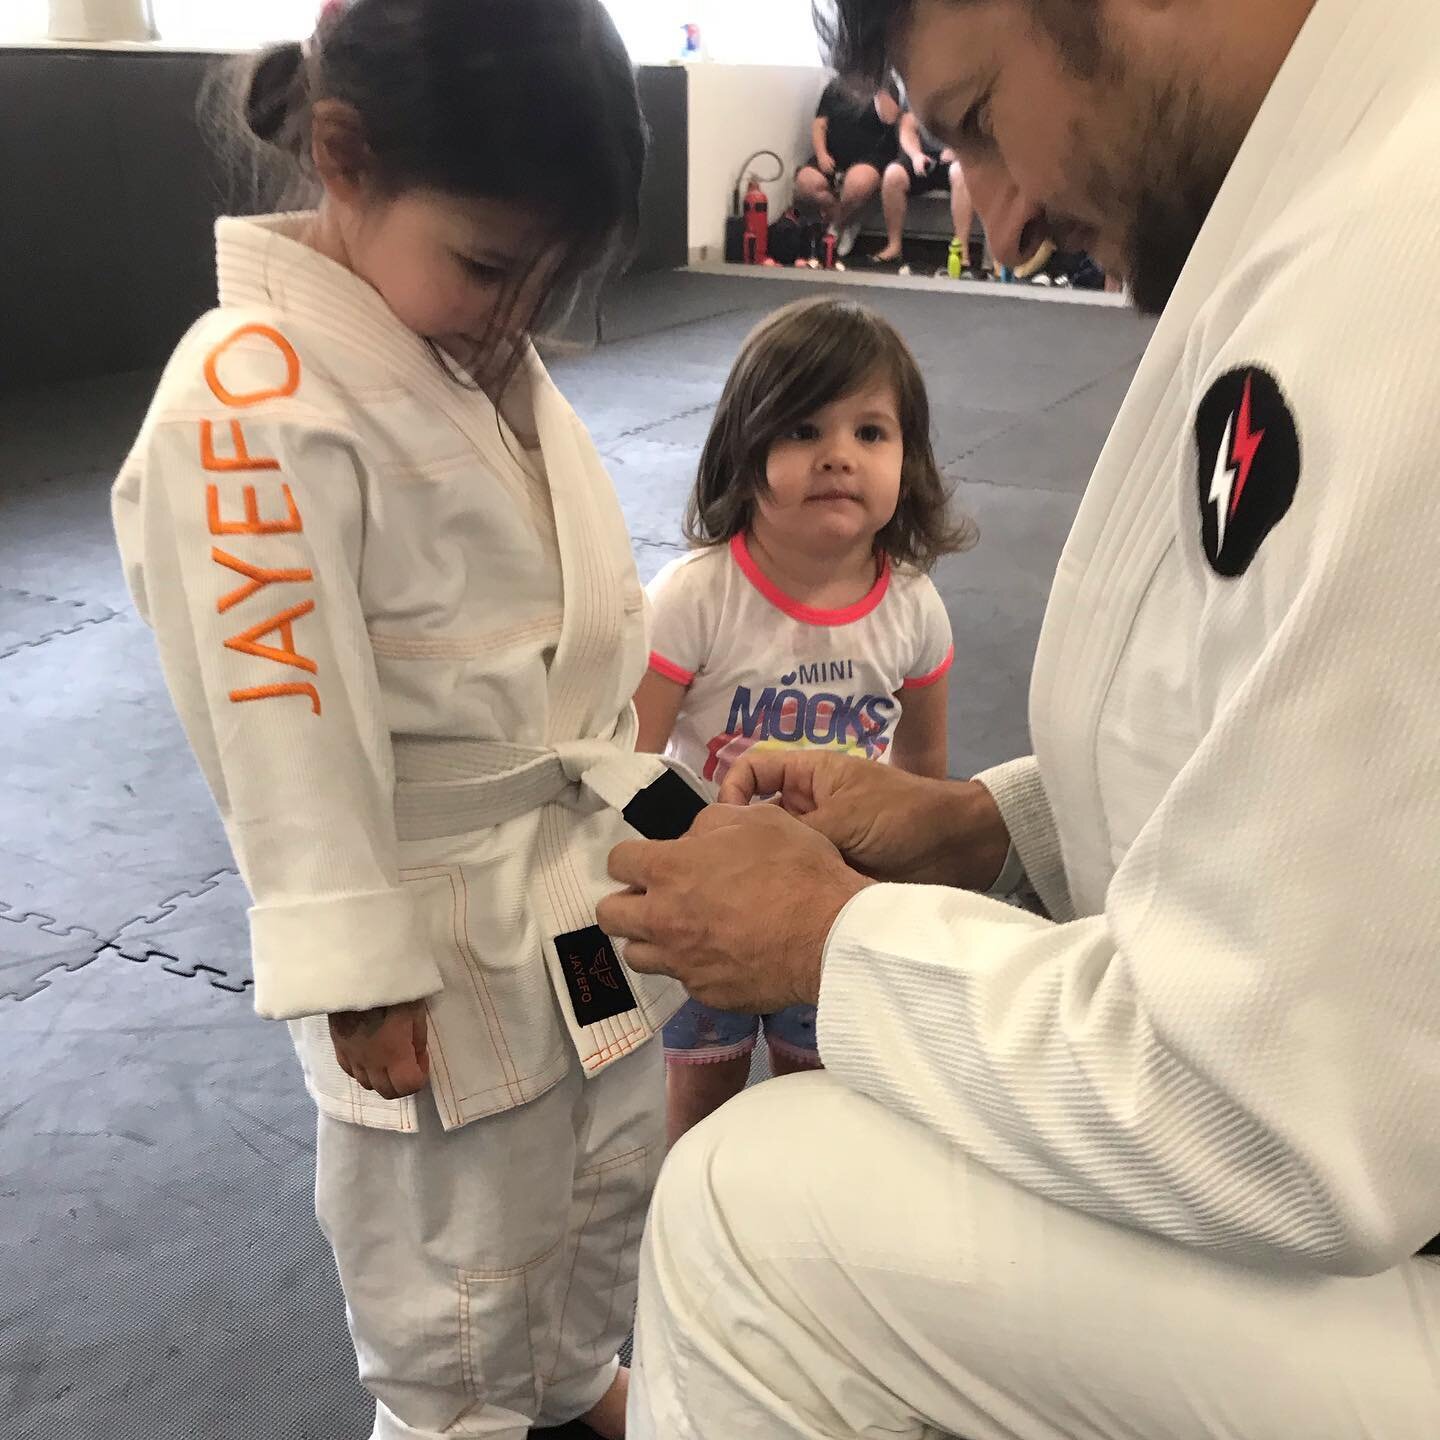 &ldquo;Why is that man putting some tape on your weird clothes big sis?&rdquo;

Having family on the mats, even for these fleeting moments is priceless. You are doing so well L and glad your baby sis was there to see an achievement.